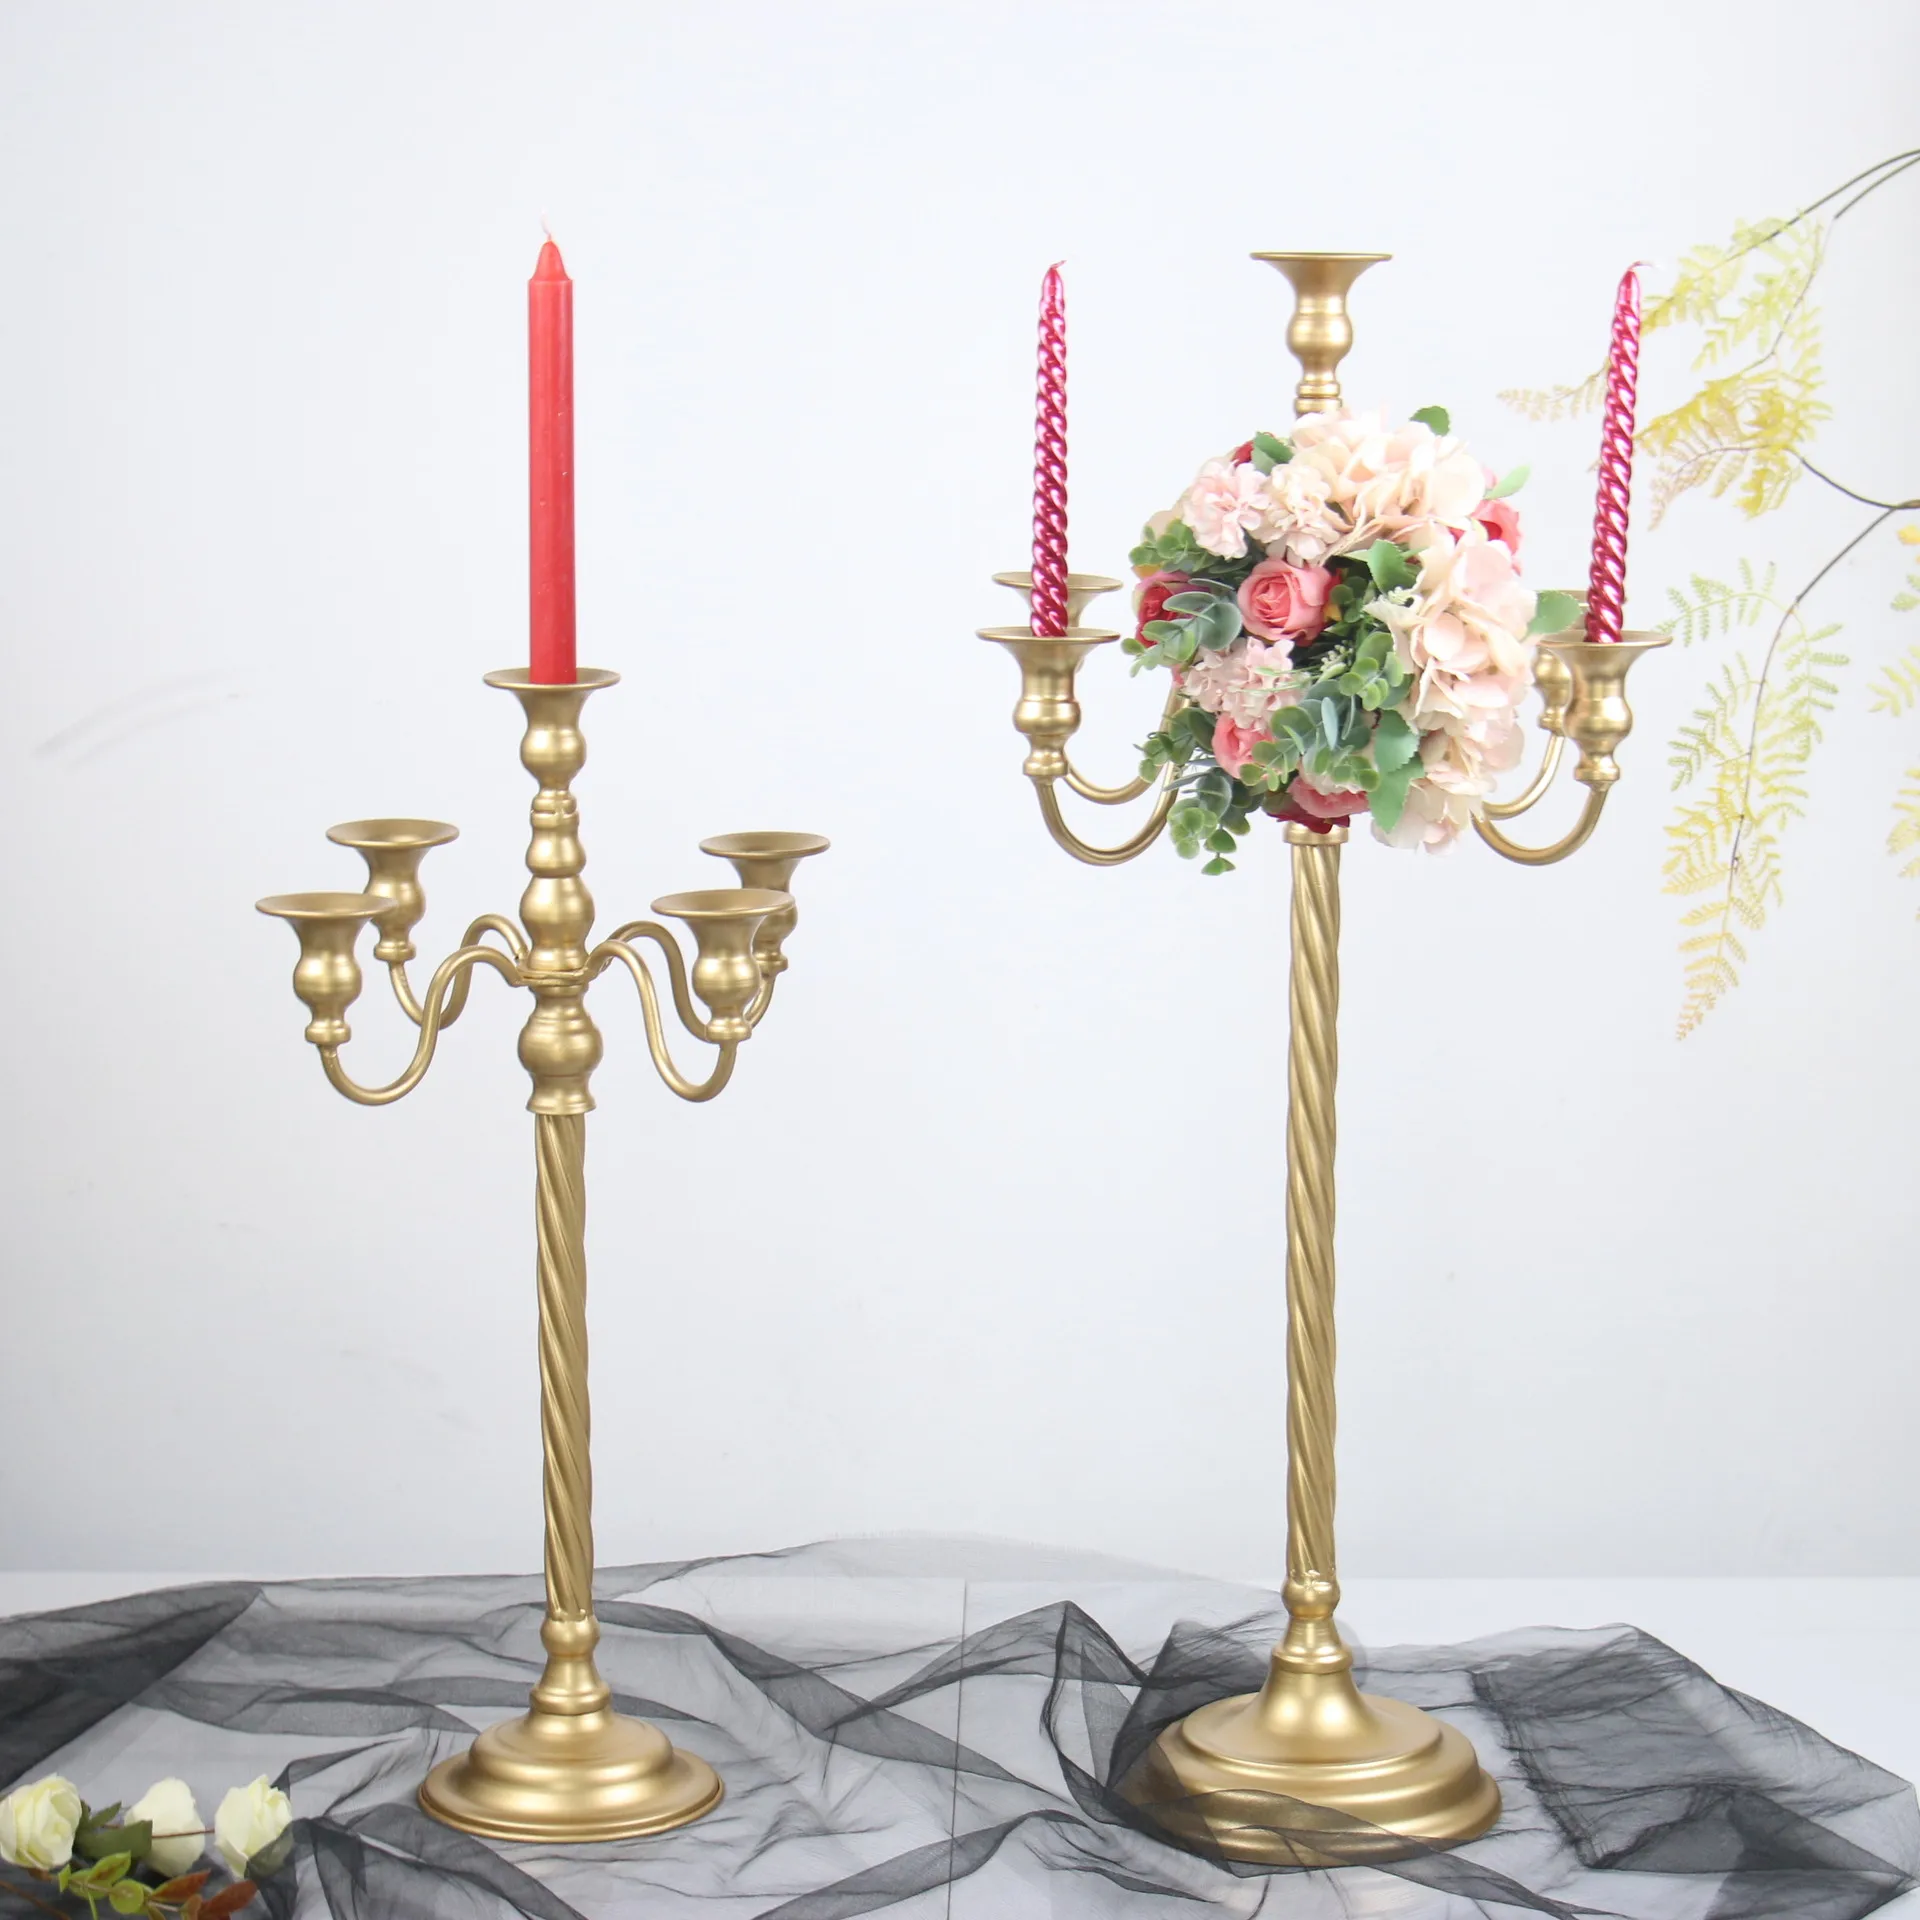 

And Metal Taper Holders Floral Wedding Event Candle Gold Candlestick Candelabra 5 53/71cm Centerpiece Arms Candle Tall For Table